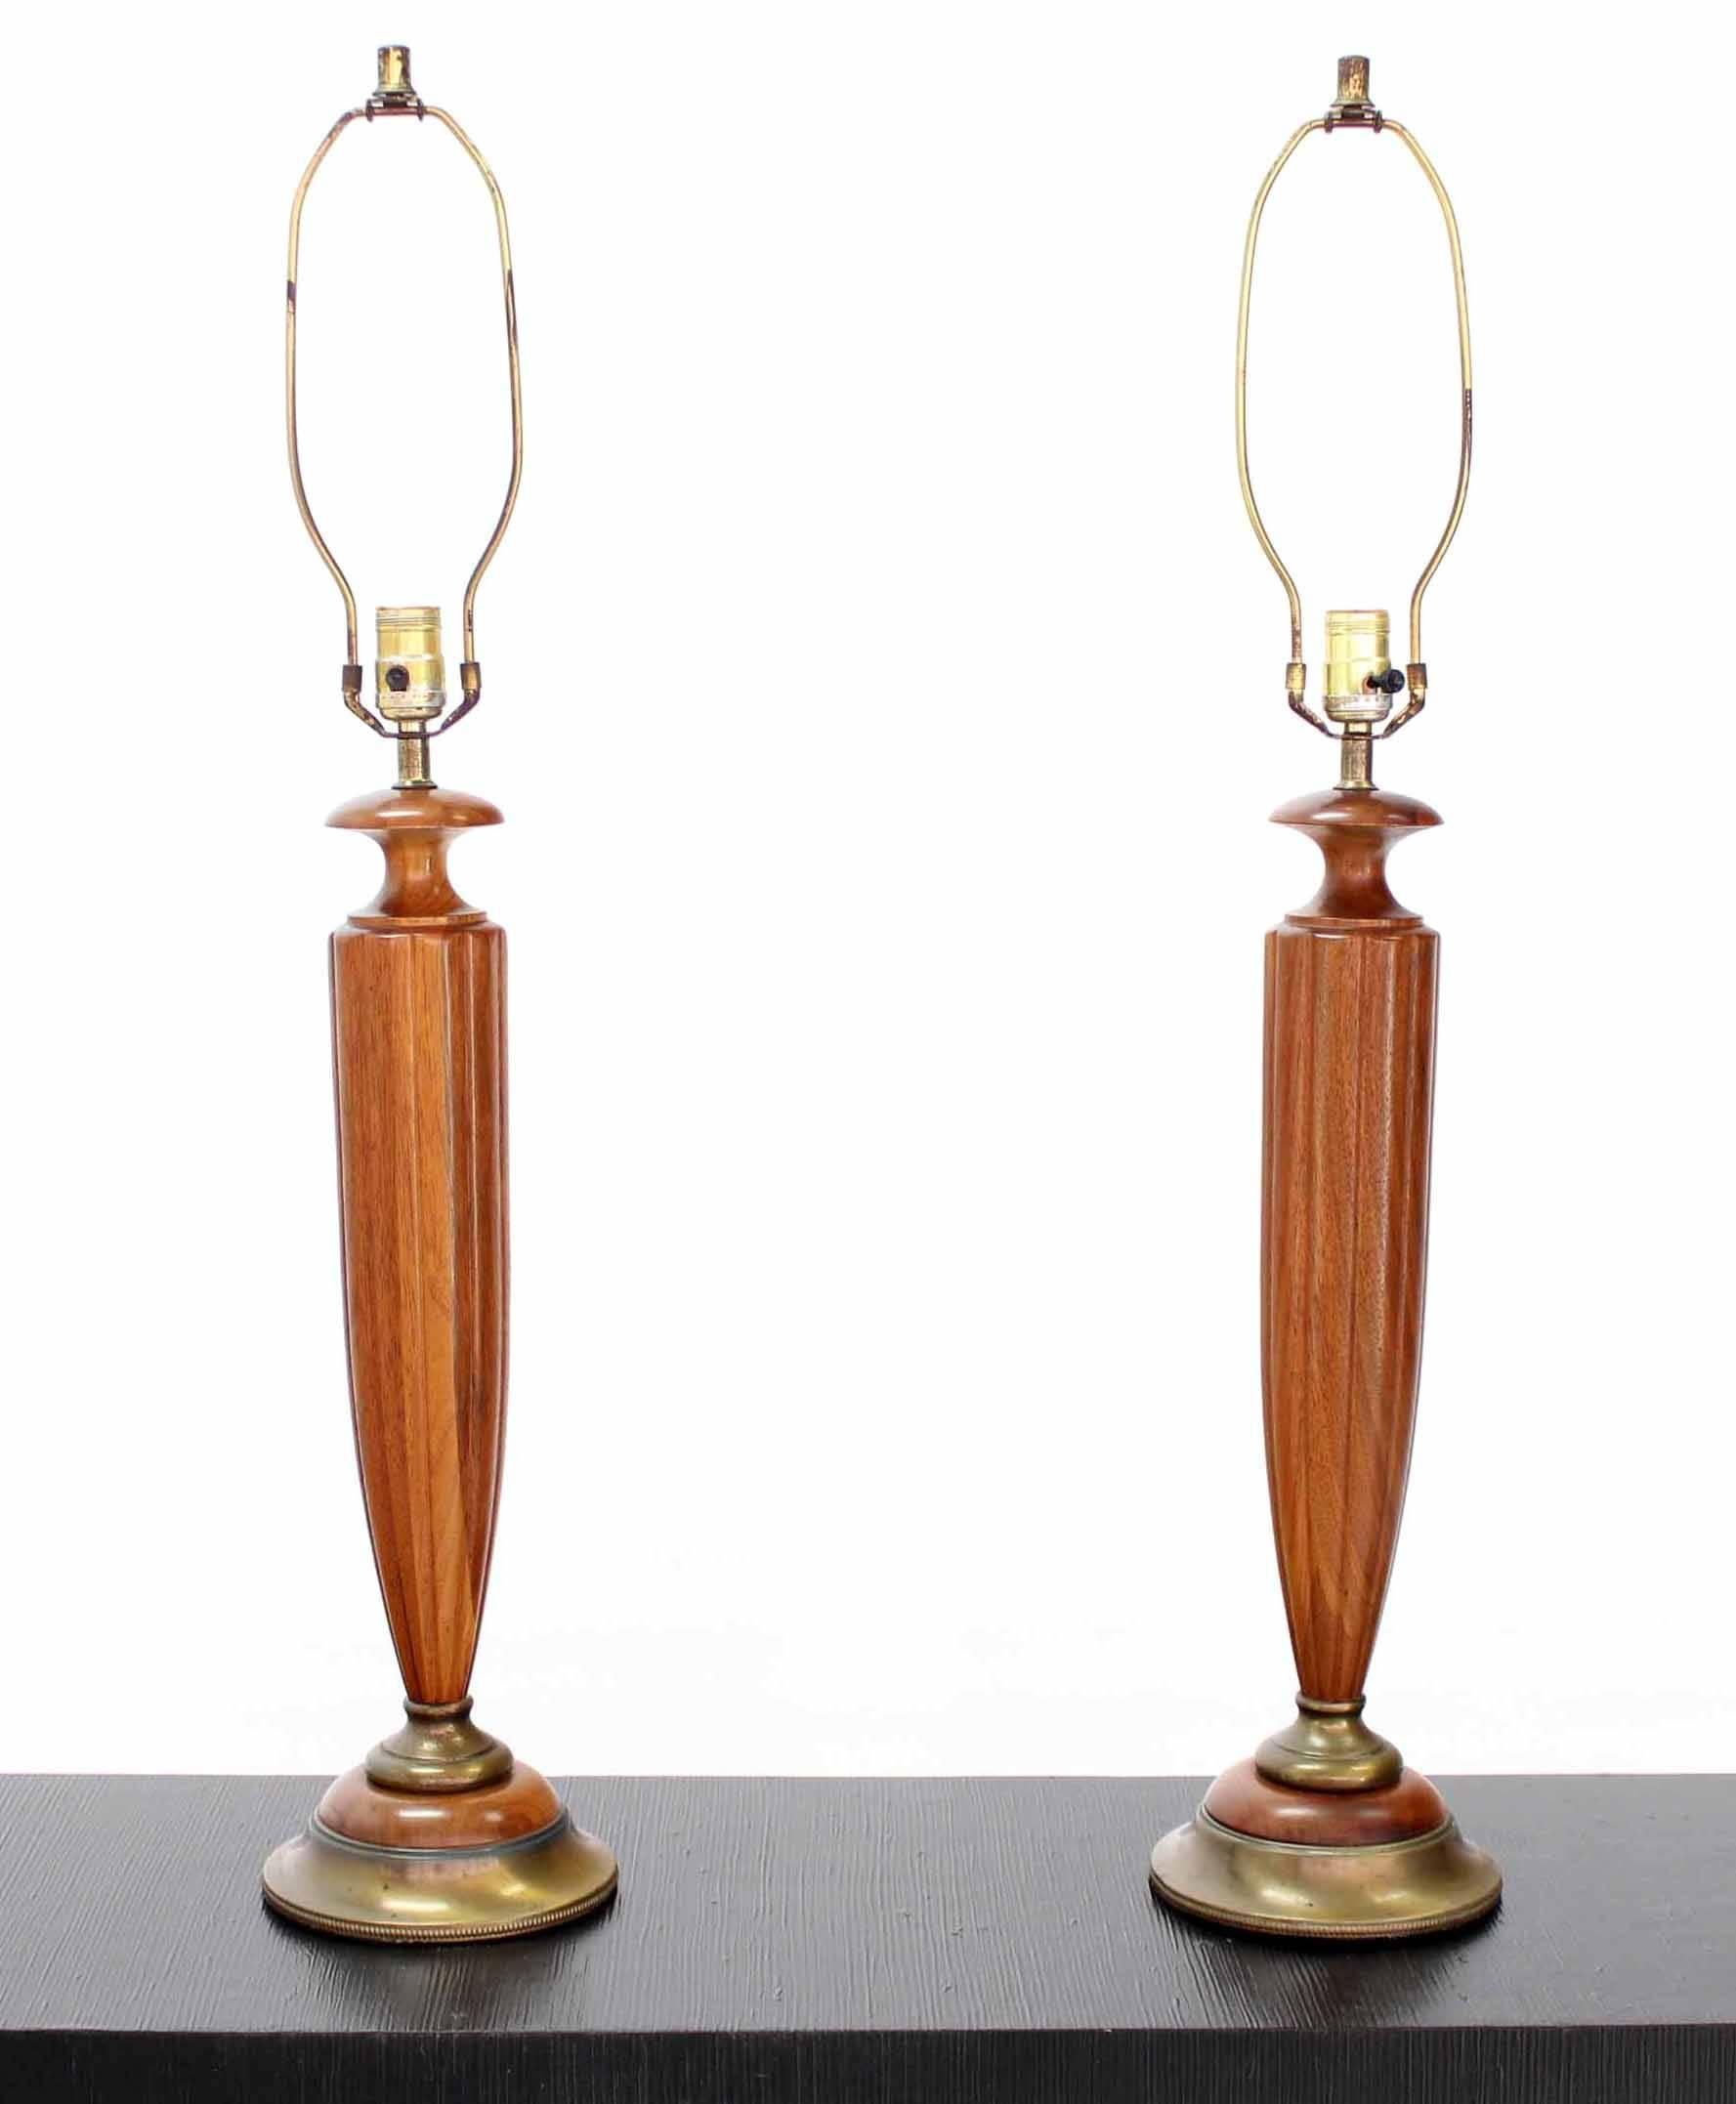 Pair of Heavy Carved Walnut and Brass Mid-Century Modern Table Lamps In Excellent Condition For Sale In Rockaway, NJ